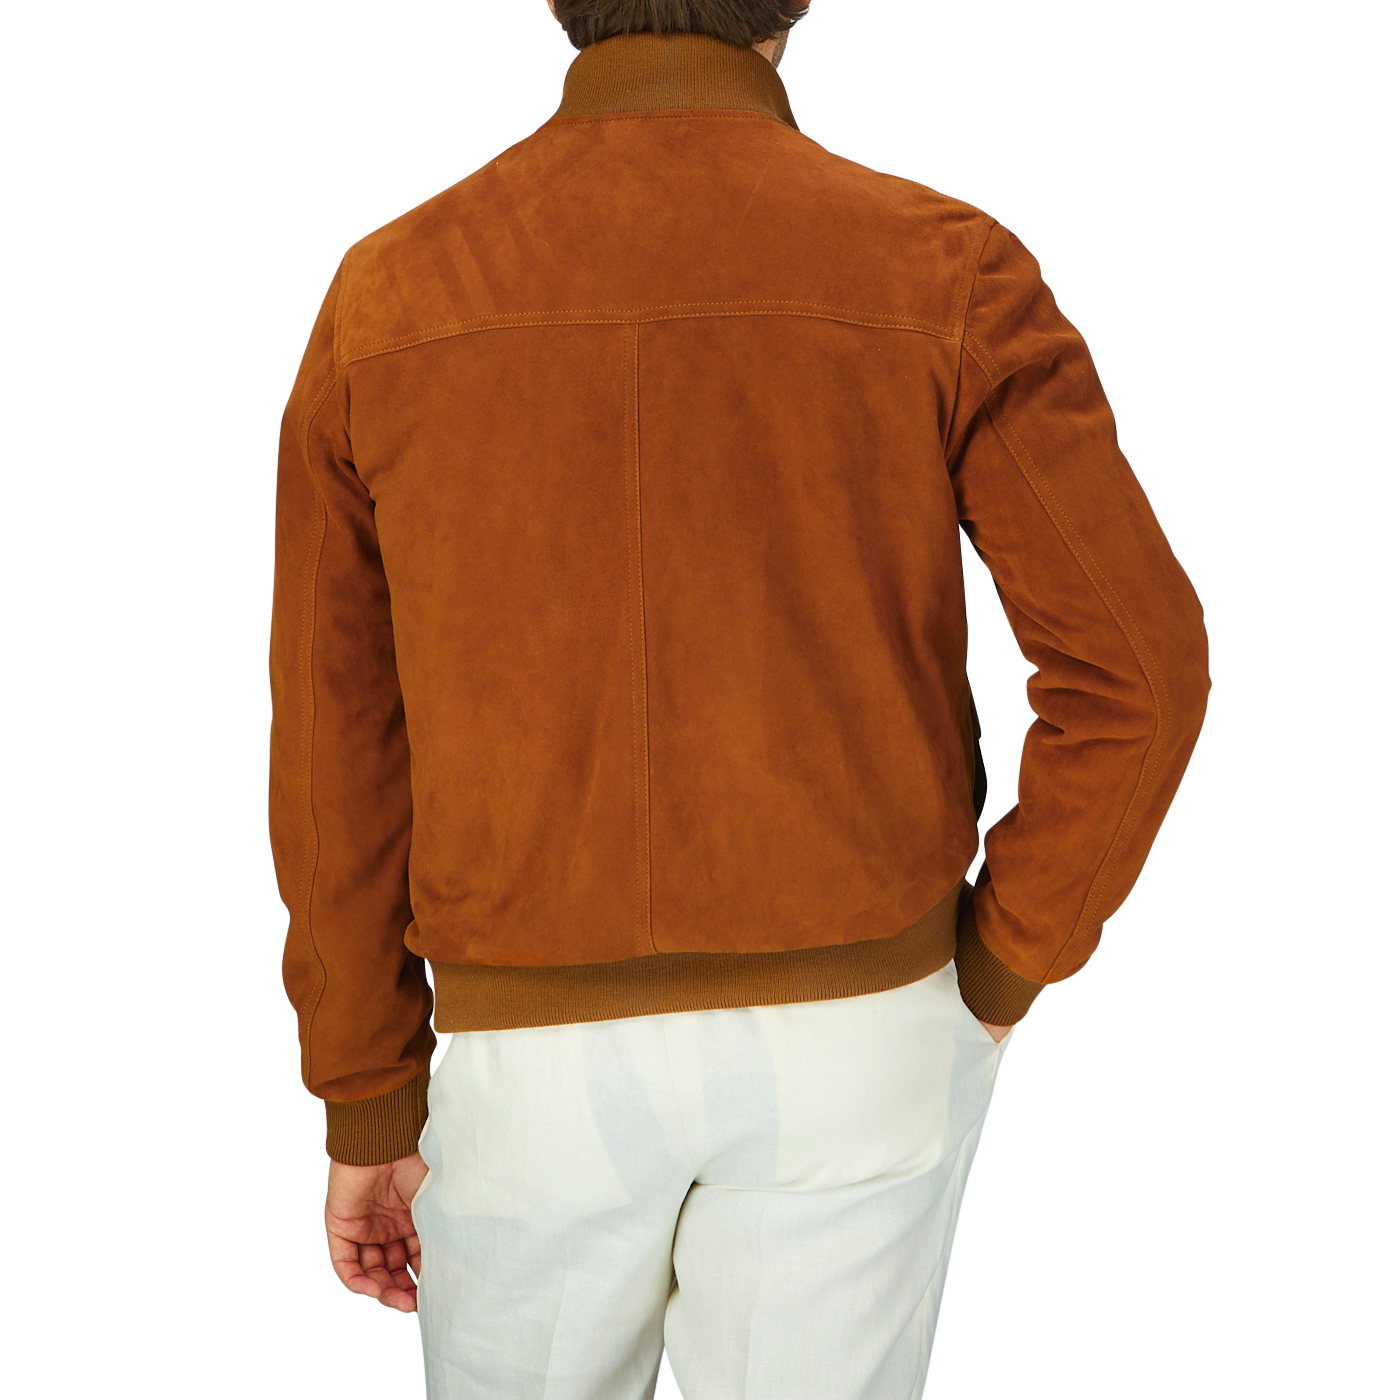 Man wearing an Italian Sandal Brown Suede Leather Valstarino jacket and white pants, seen from the back.